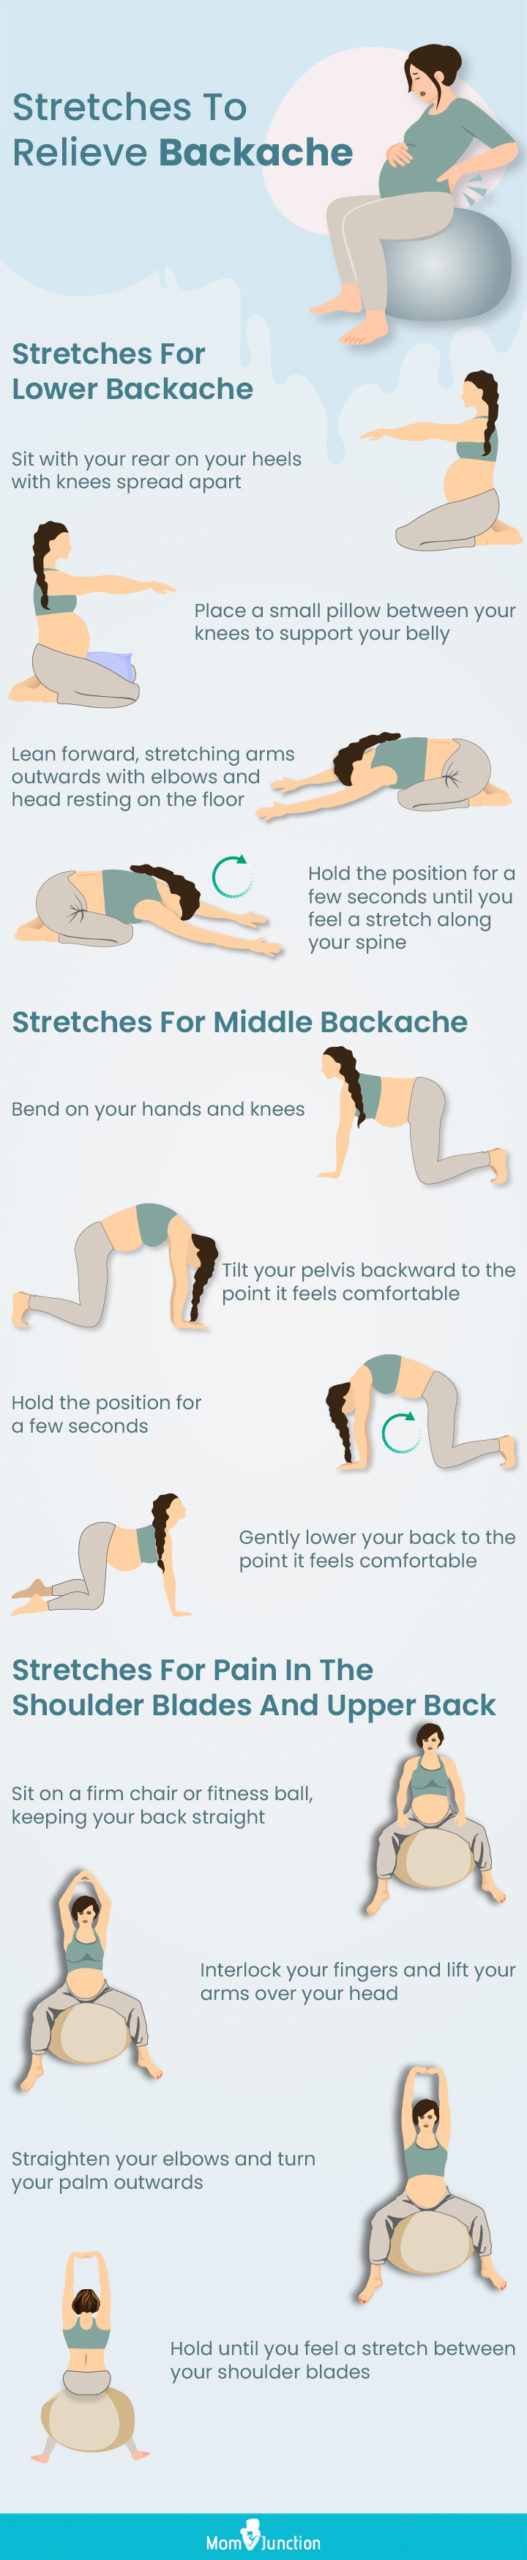 stretches to relieve backache (infographic)